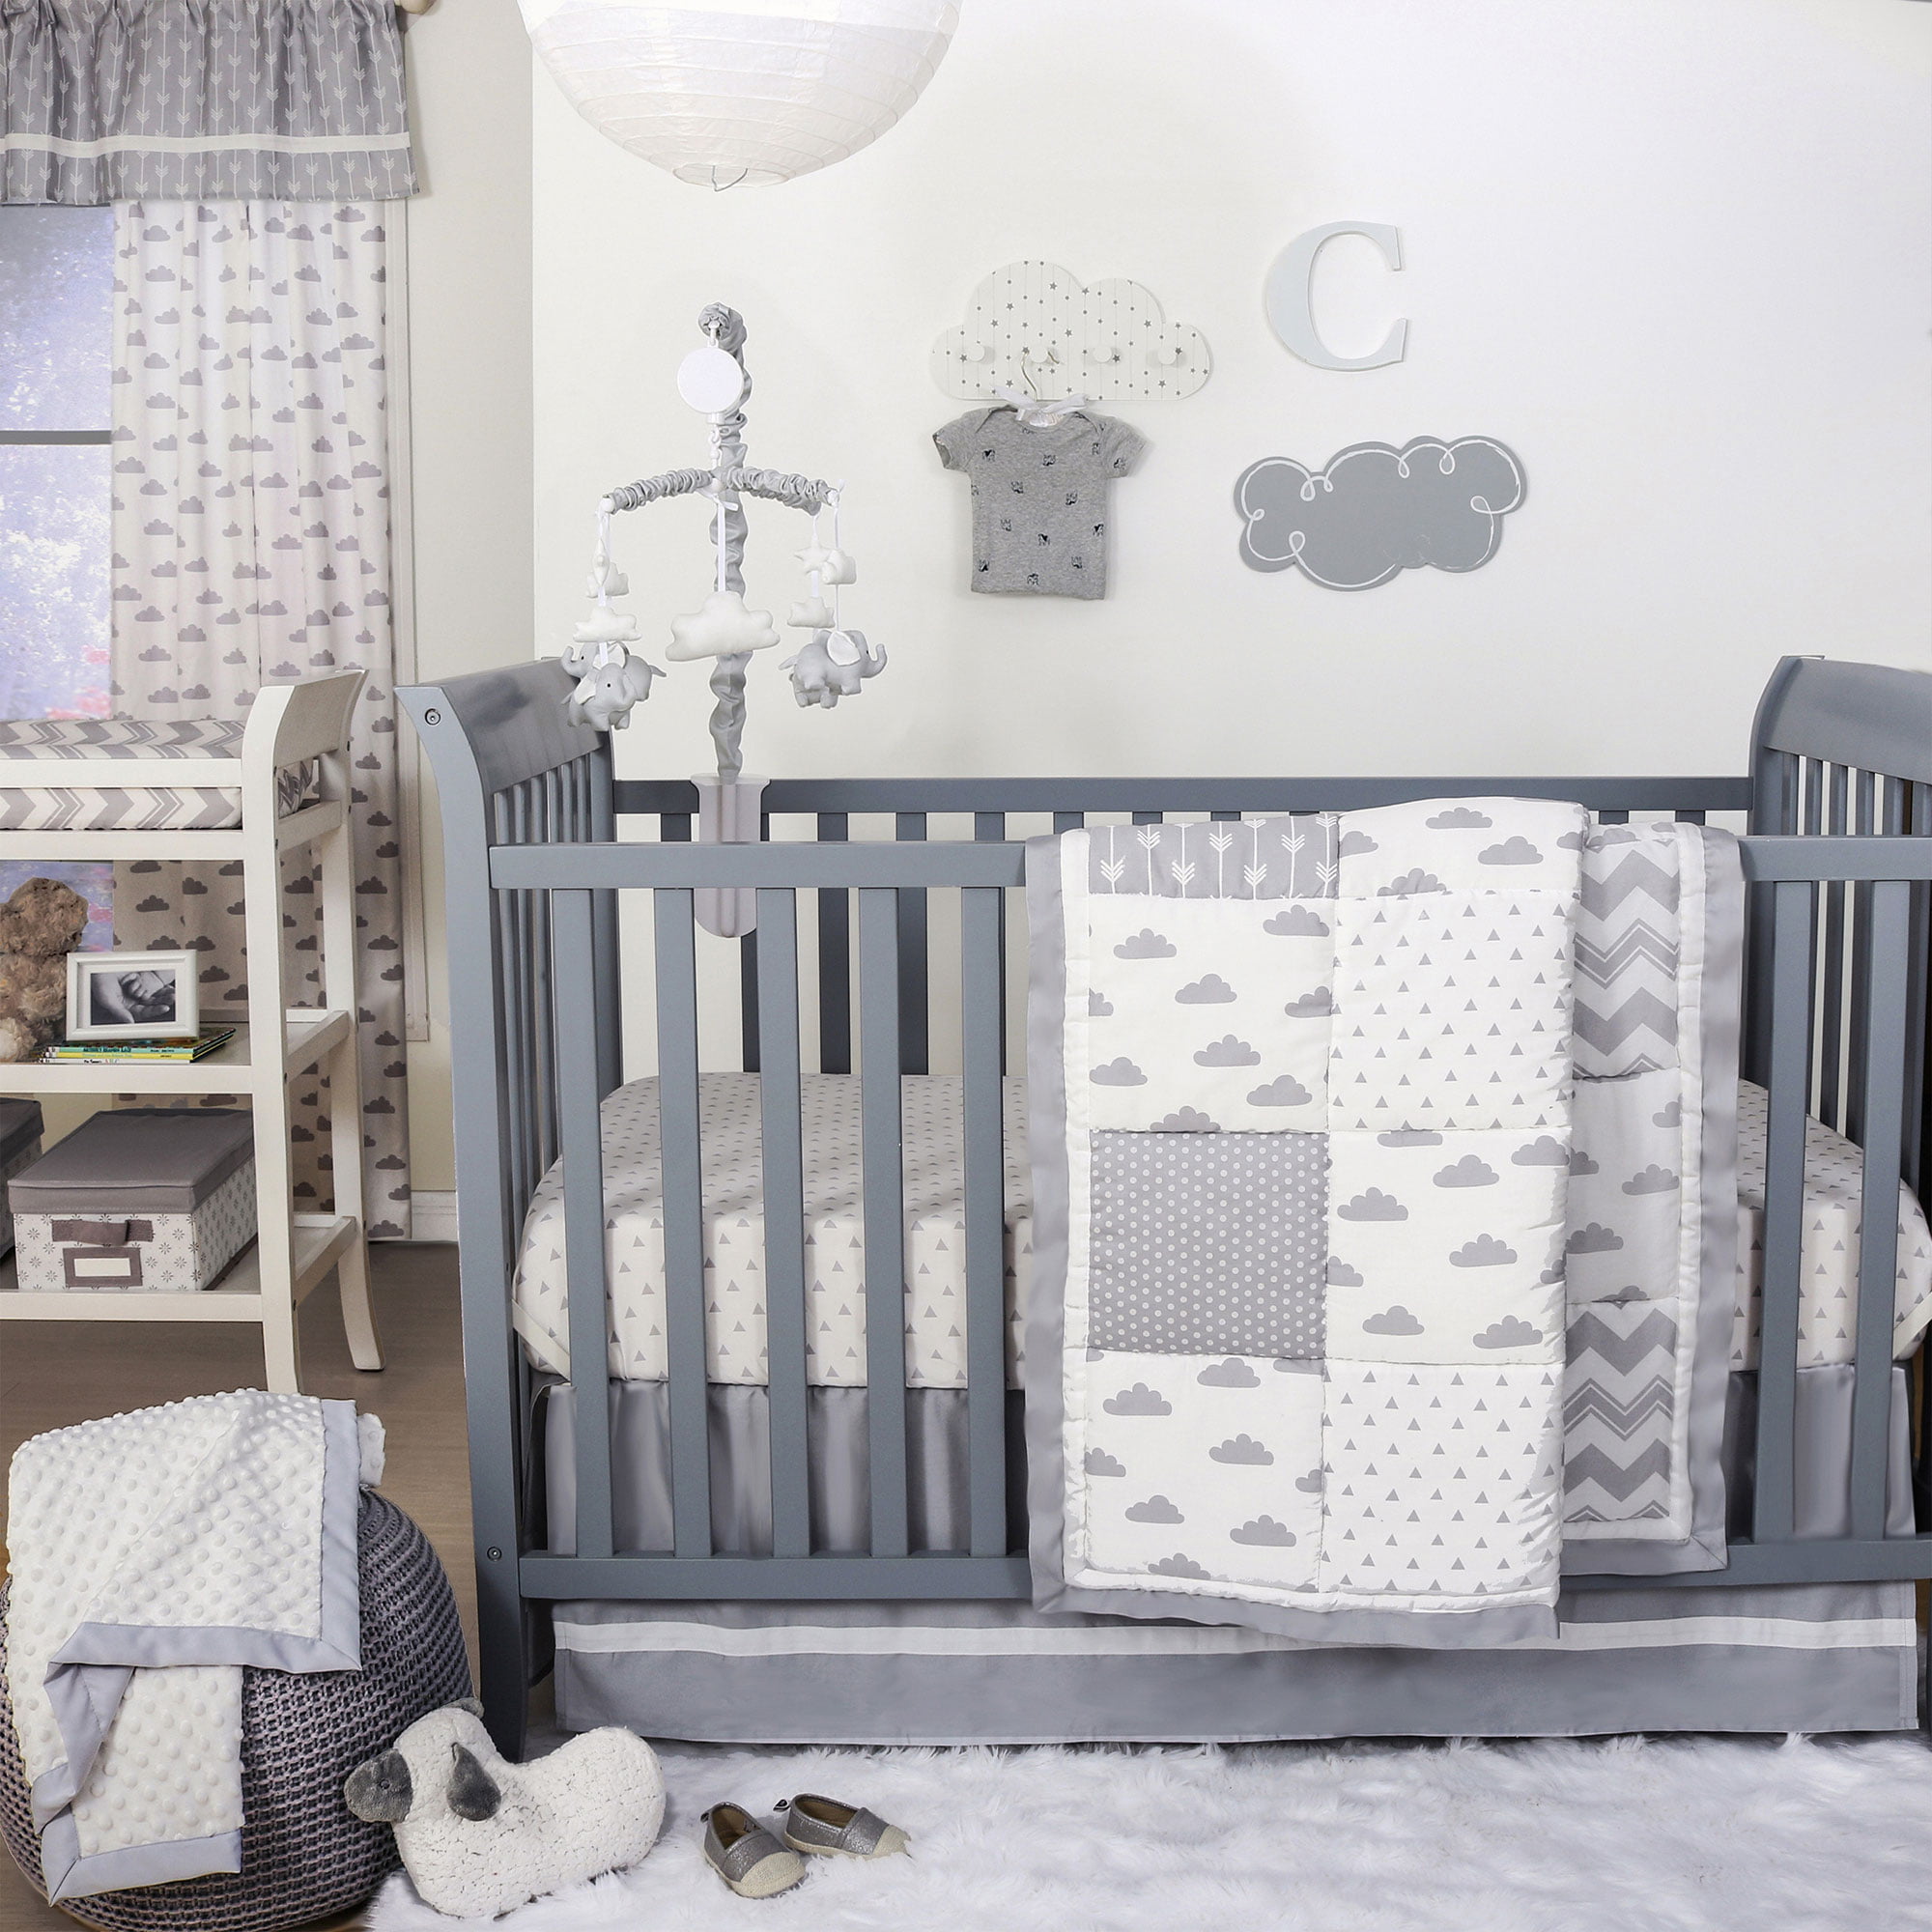 Grey Cloud and Geometric Patch Celestial Dots 4 Piece Baby Crib Bedding Set by The Peanut Shell